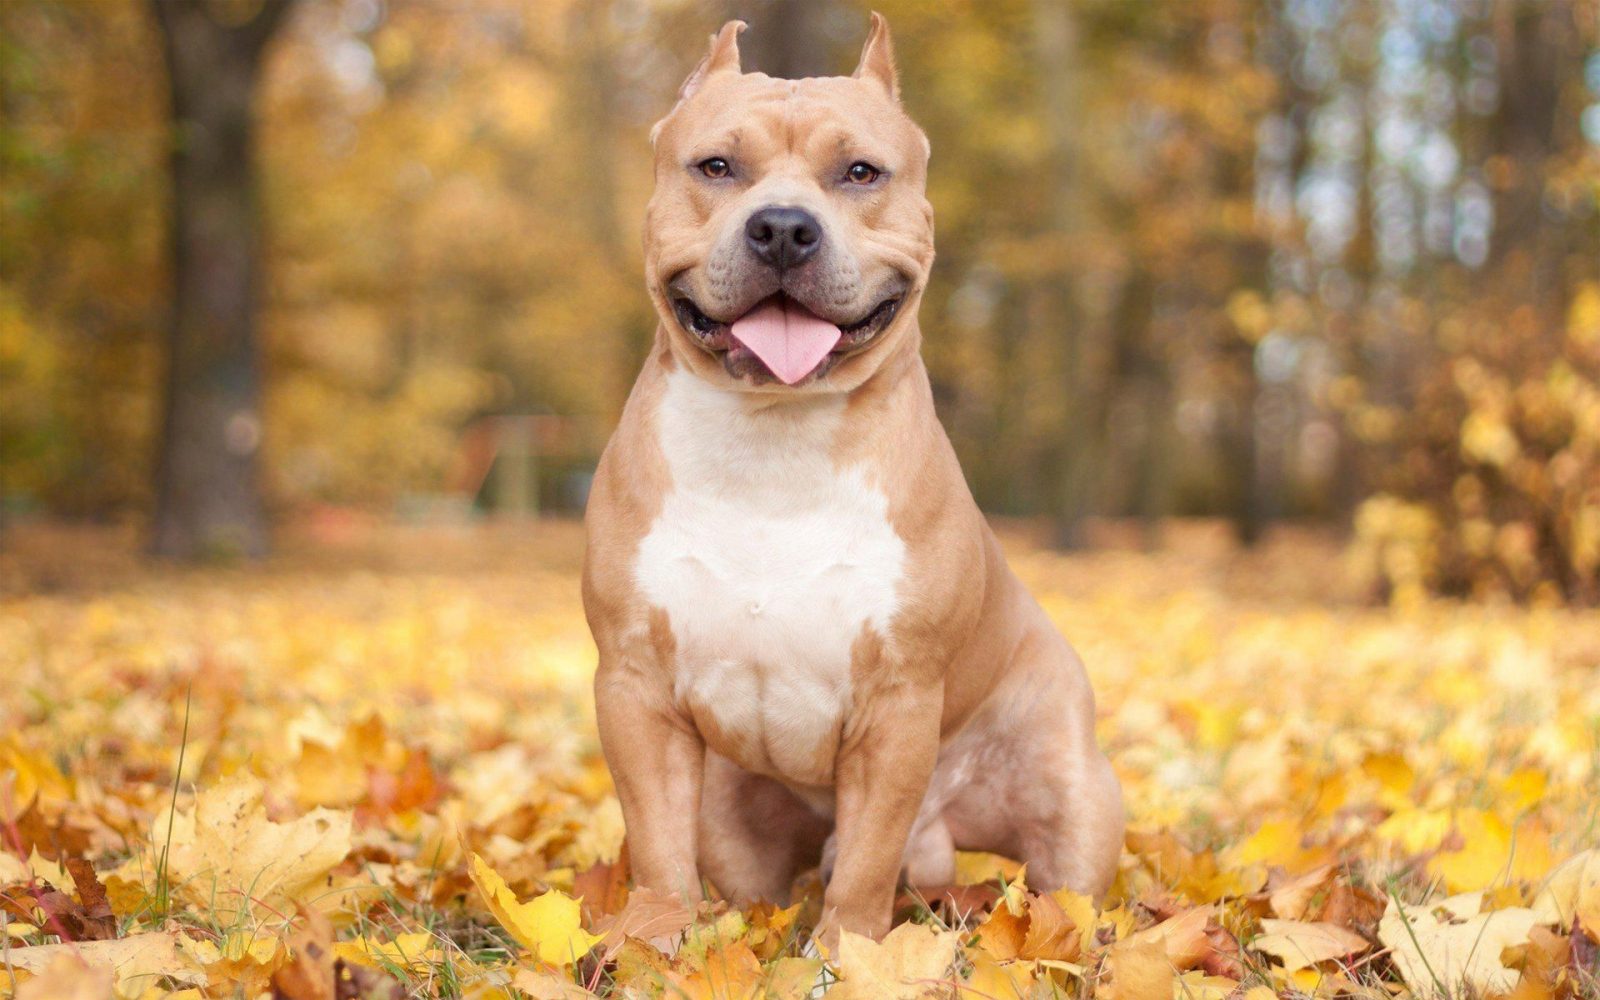 Only the Biggest Dog Lovers Can Identify All 20 of These Breeds 🐾 — Can You? Pit Bull